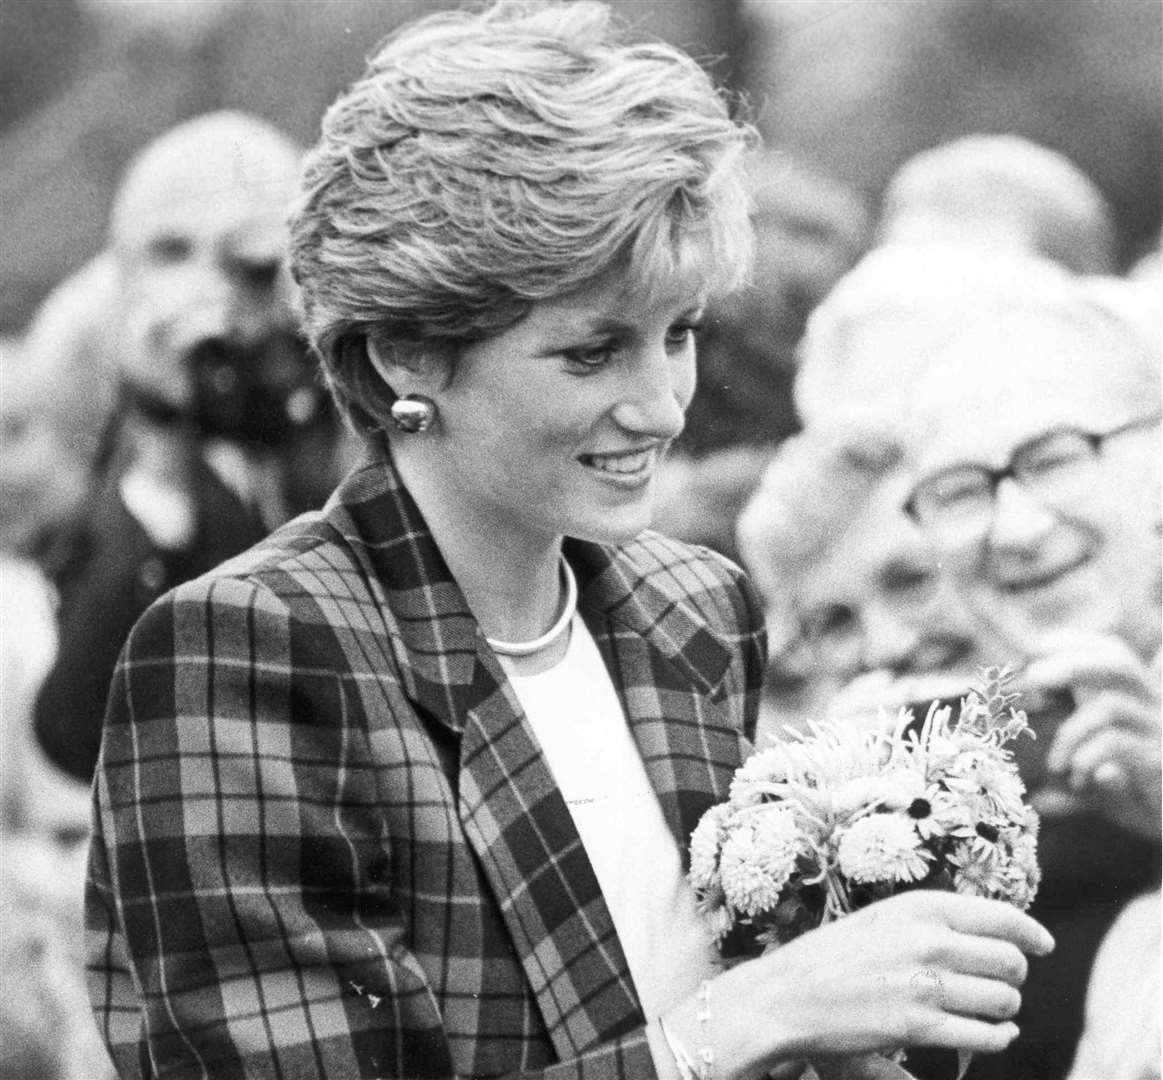 Princess Diana visited St Augustine's in October 1990 as part of her role as patron of the charity, Turning Point, which helps those with drink, drug and mental health problems. She toured three wards and met patients before joining in a seminar on mental health